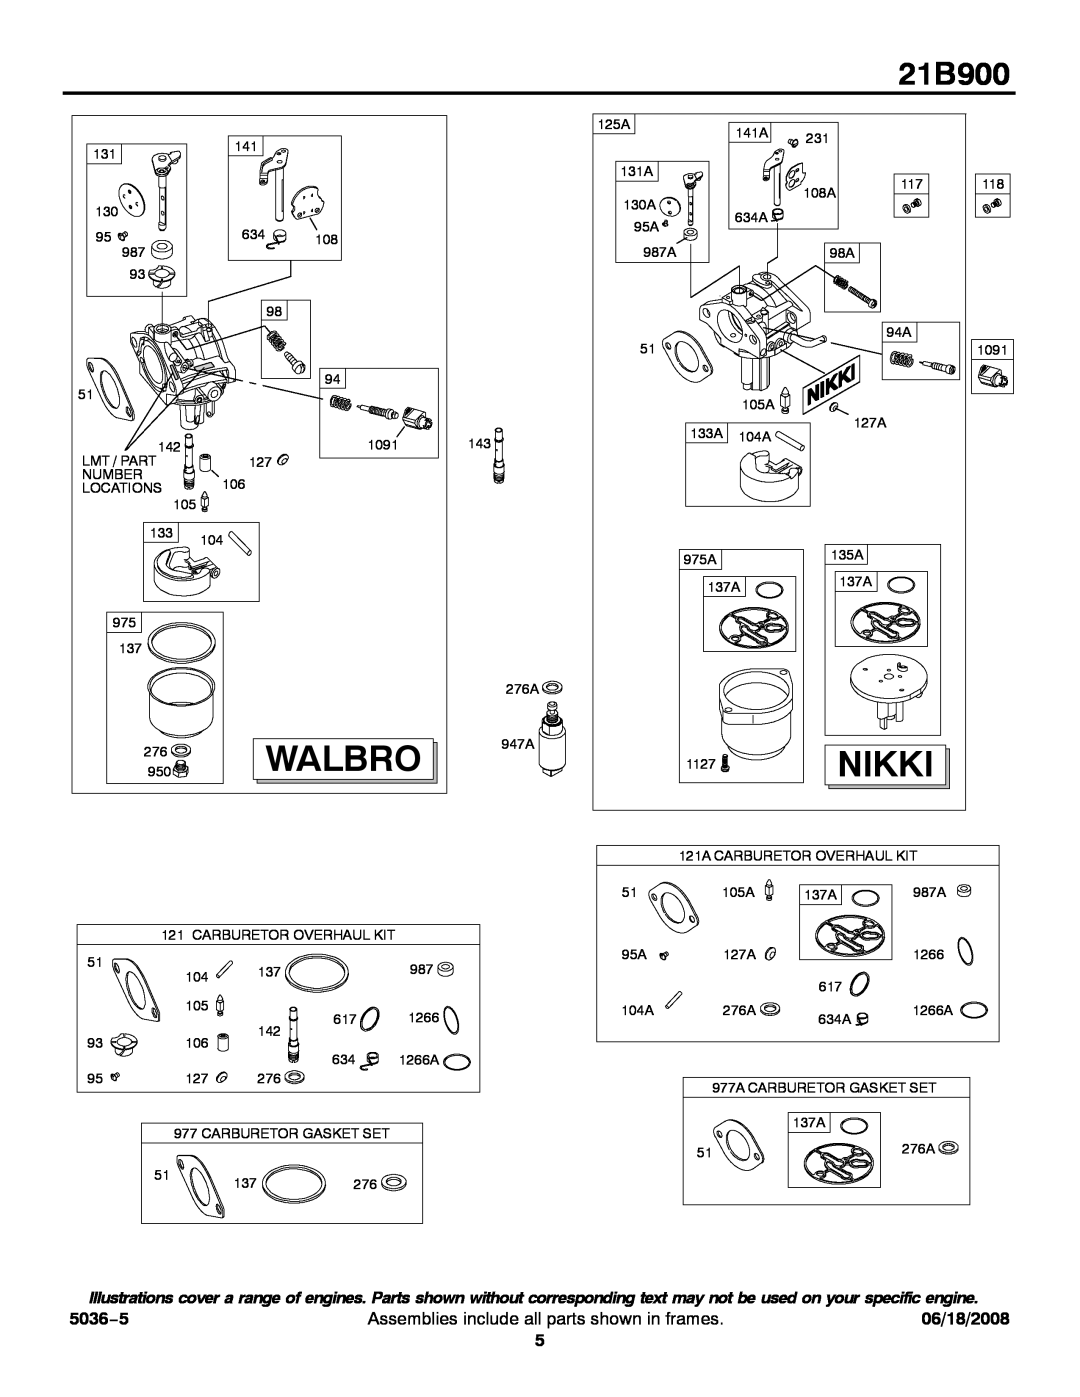 Briggs & Stratton 21B900 service manual Walbro, Nikki, 5036−5, Assemblies include all parts shown in frames, 06/18/2008 